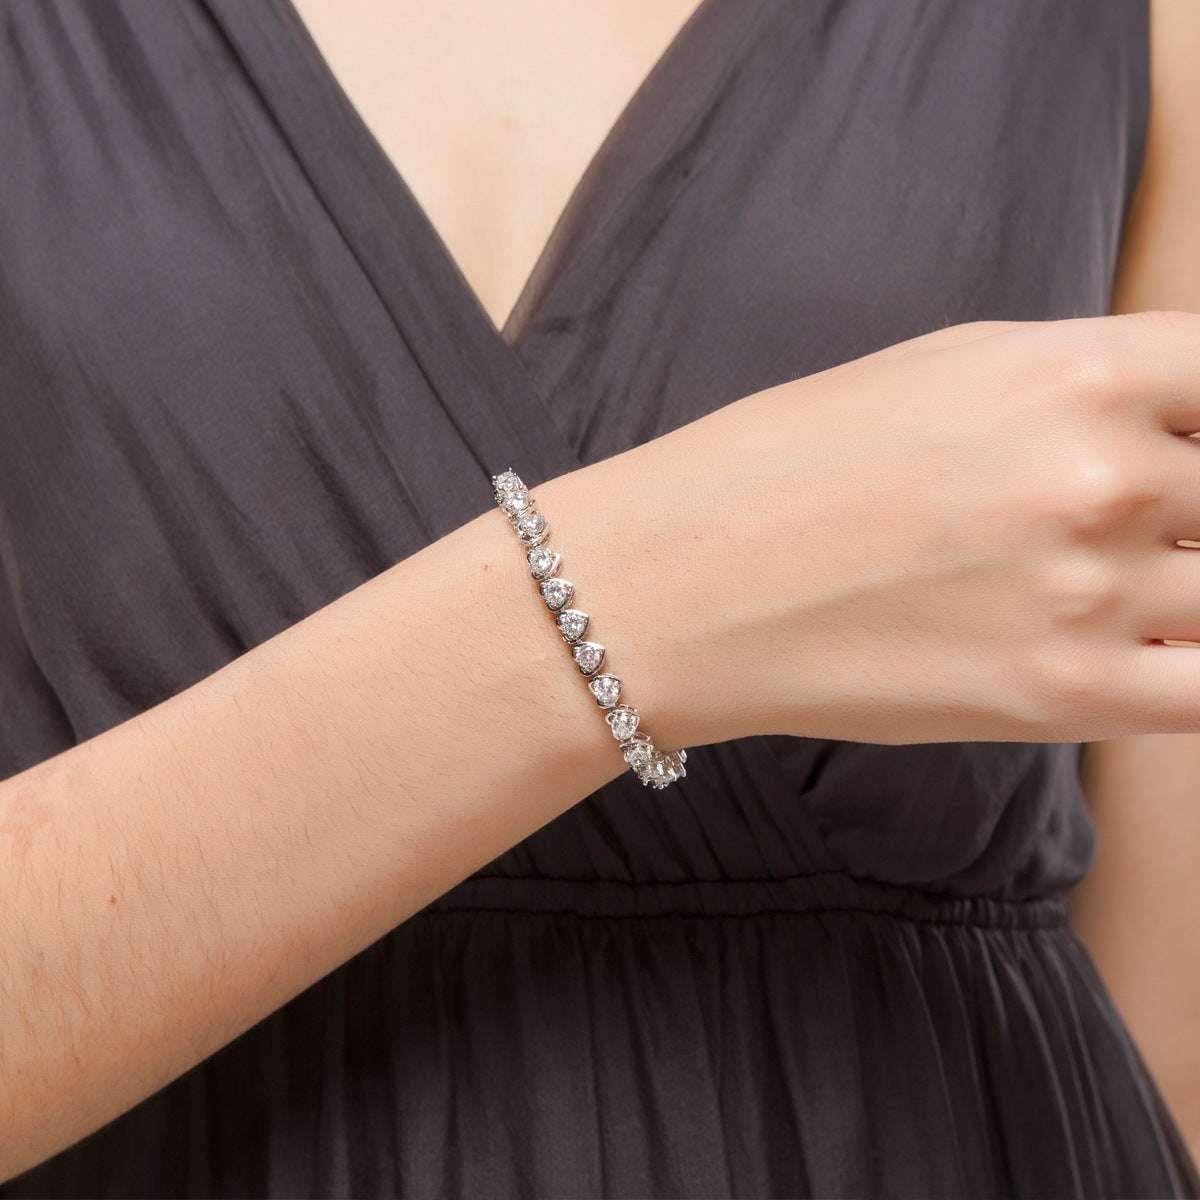 Elegant Female Accessory, Radiation Protection Jewelry, Zircon Love Bracelet - available at Sparq Mart